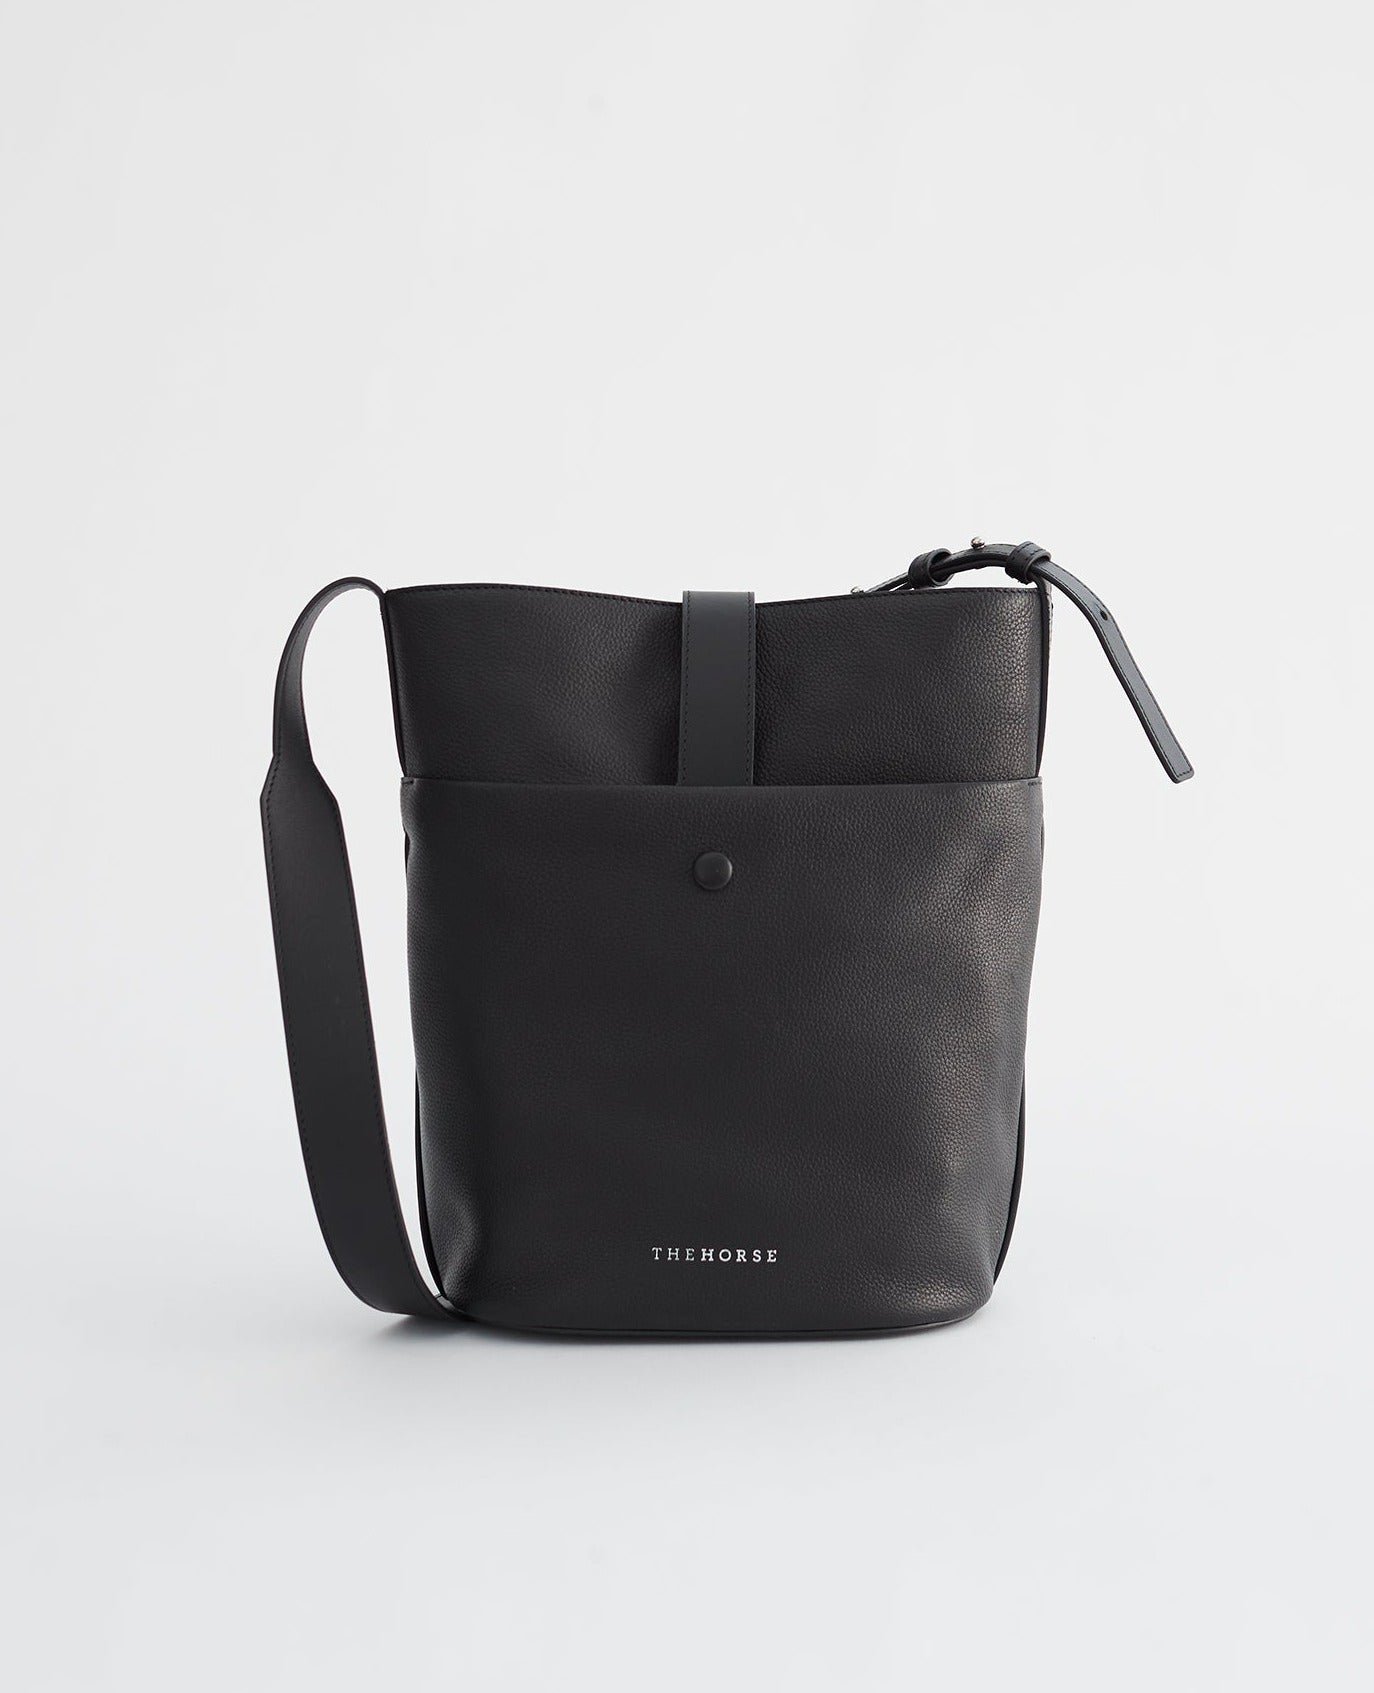 The Large Luella Bucket Bag in Black Leather by The Horse®